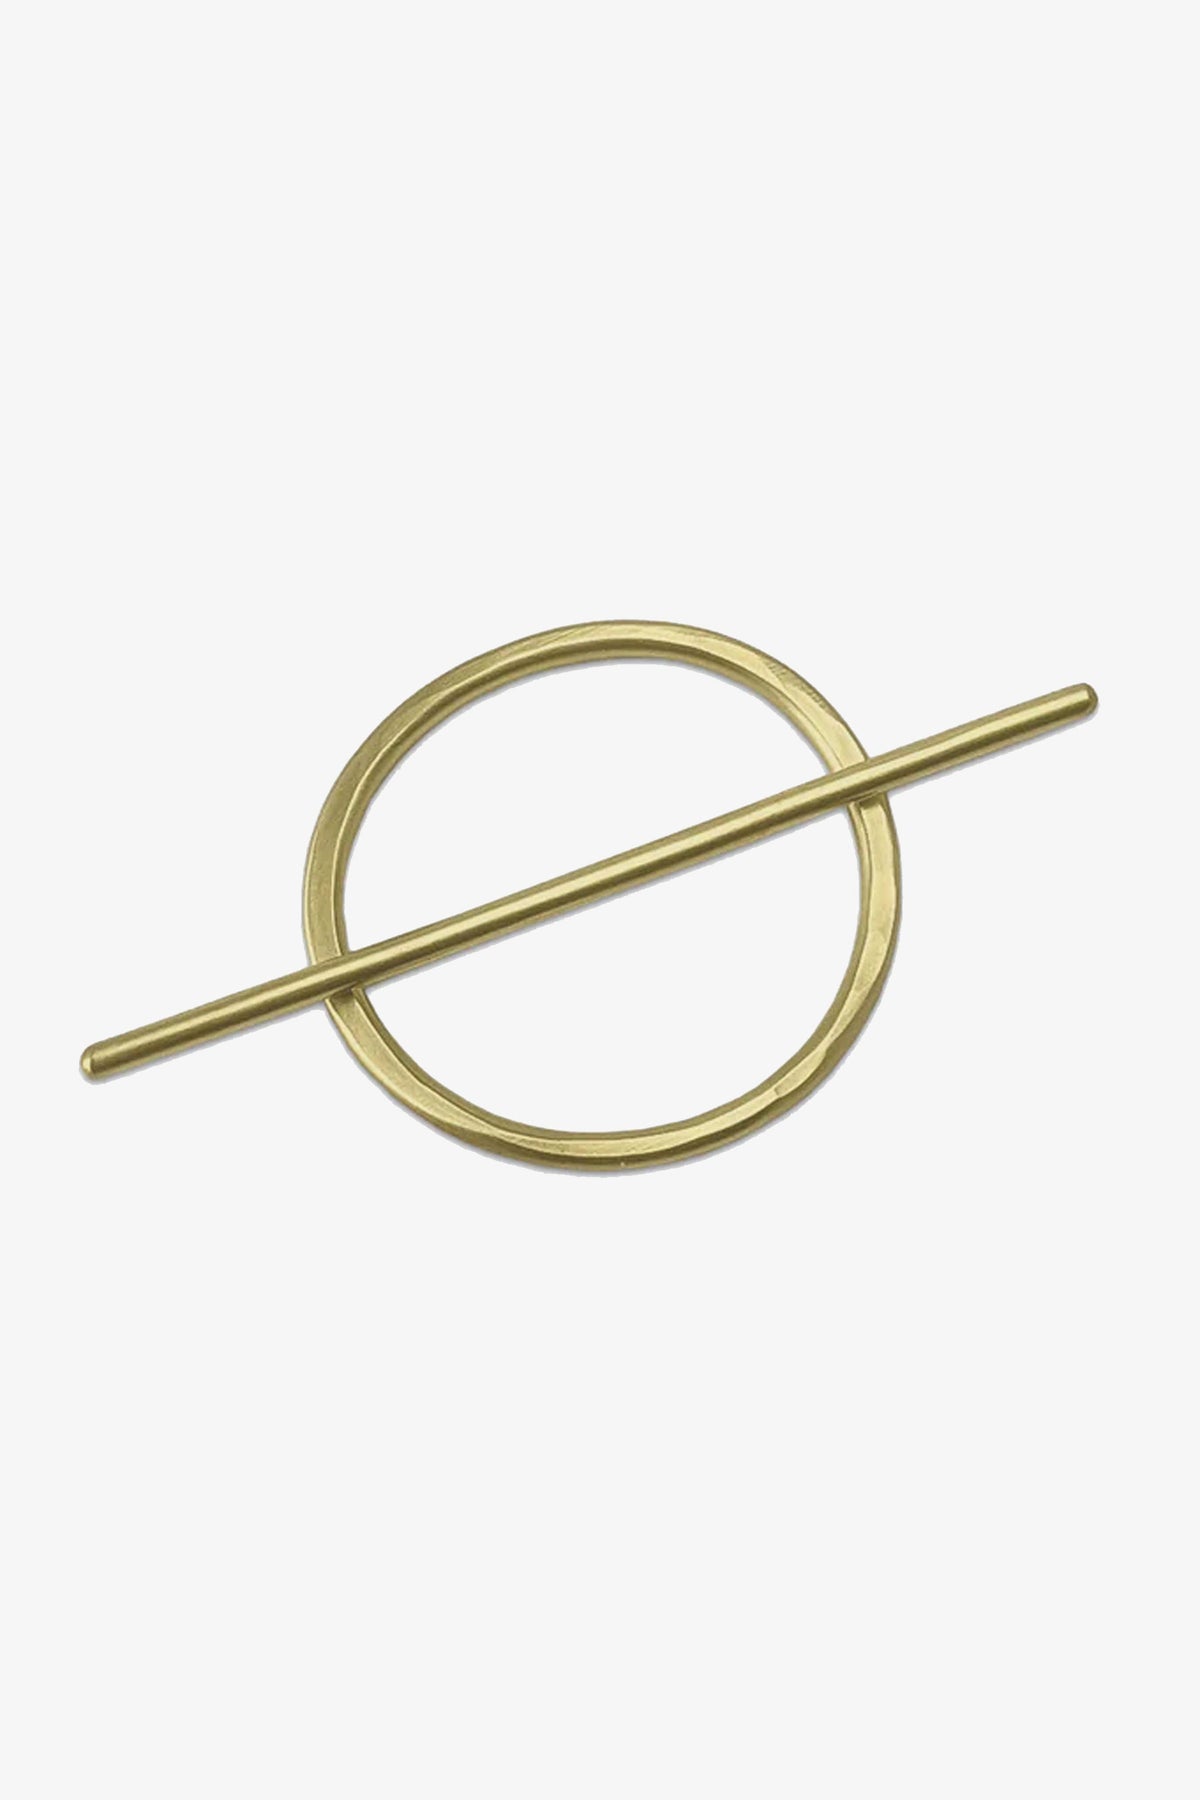 Abstract Oval Brass Hair Slide | Small